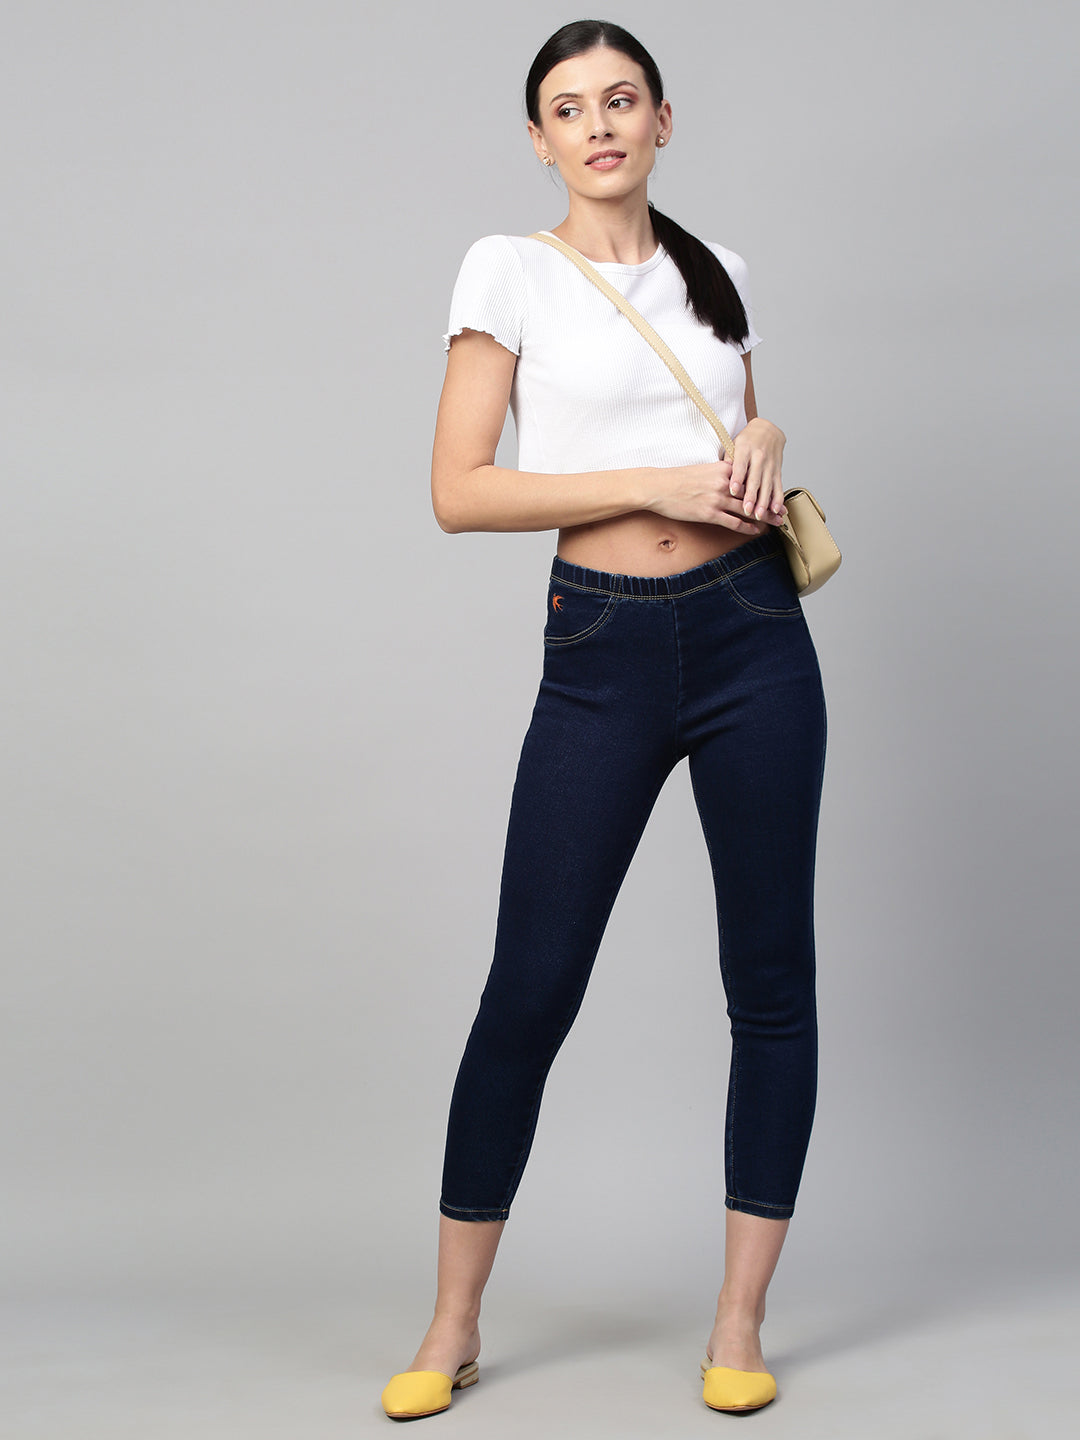 Pull On Ultra Skinny Cropped Jeans